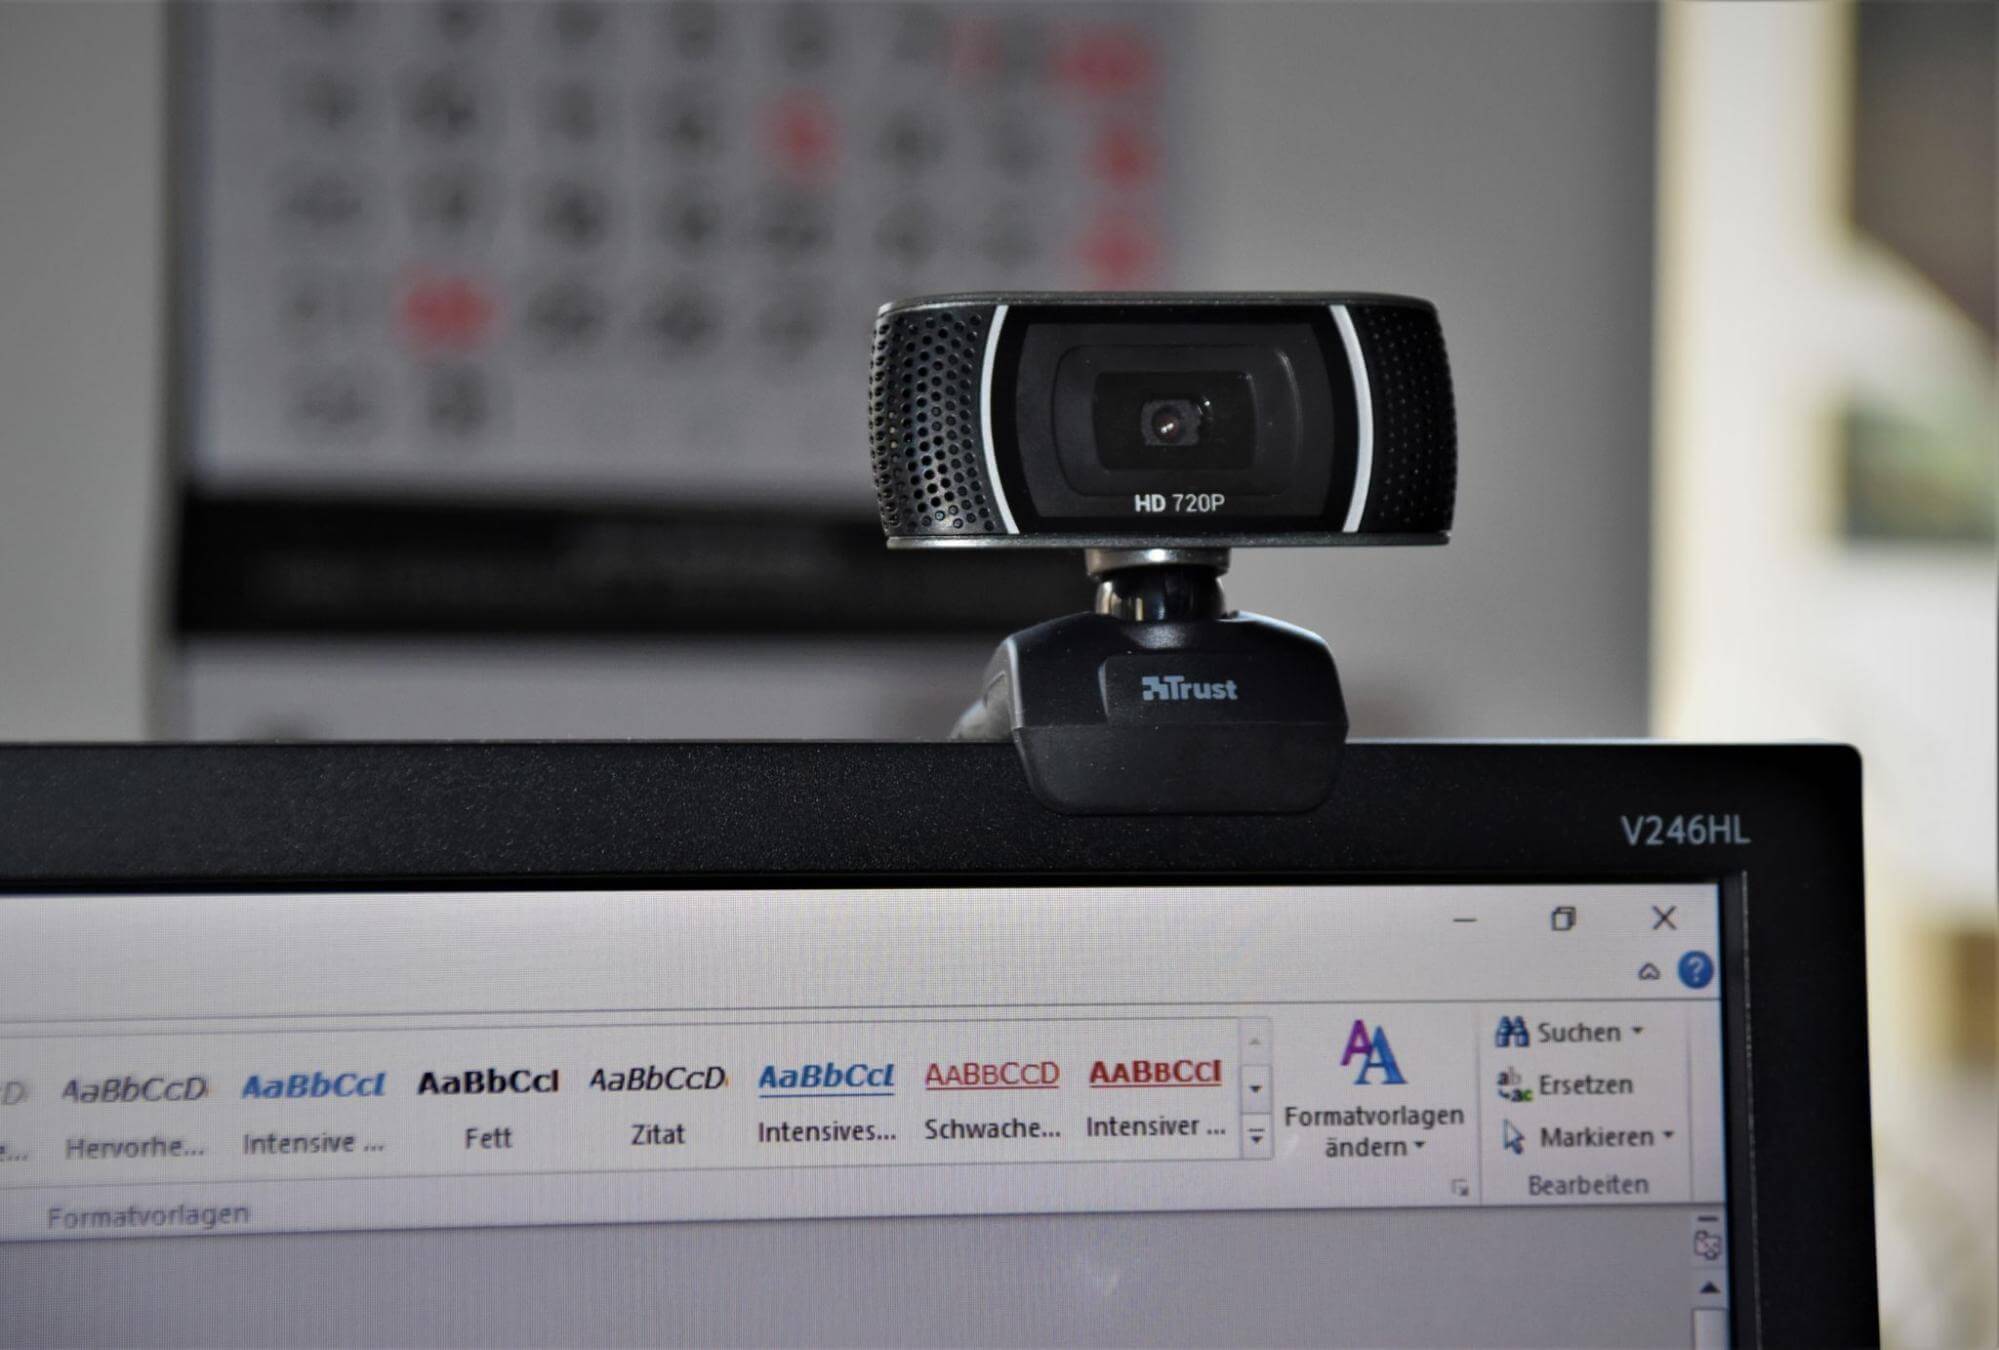 How to Record Webcam Video on Any PC (Mac & Windows)